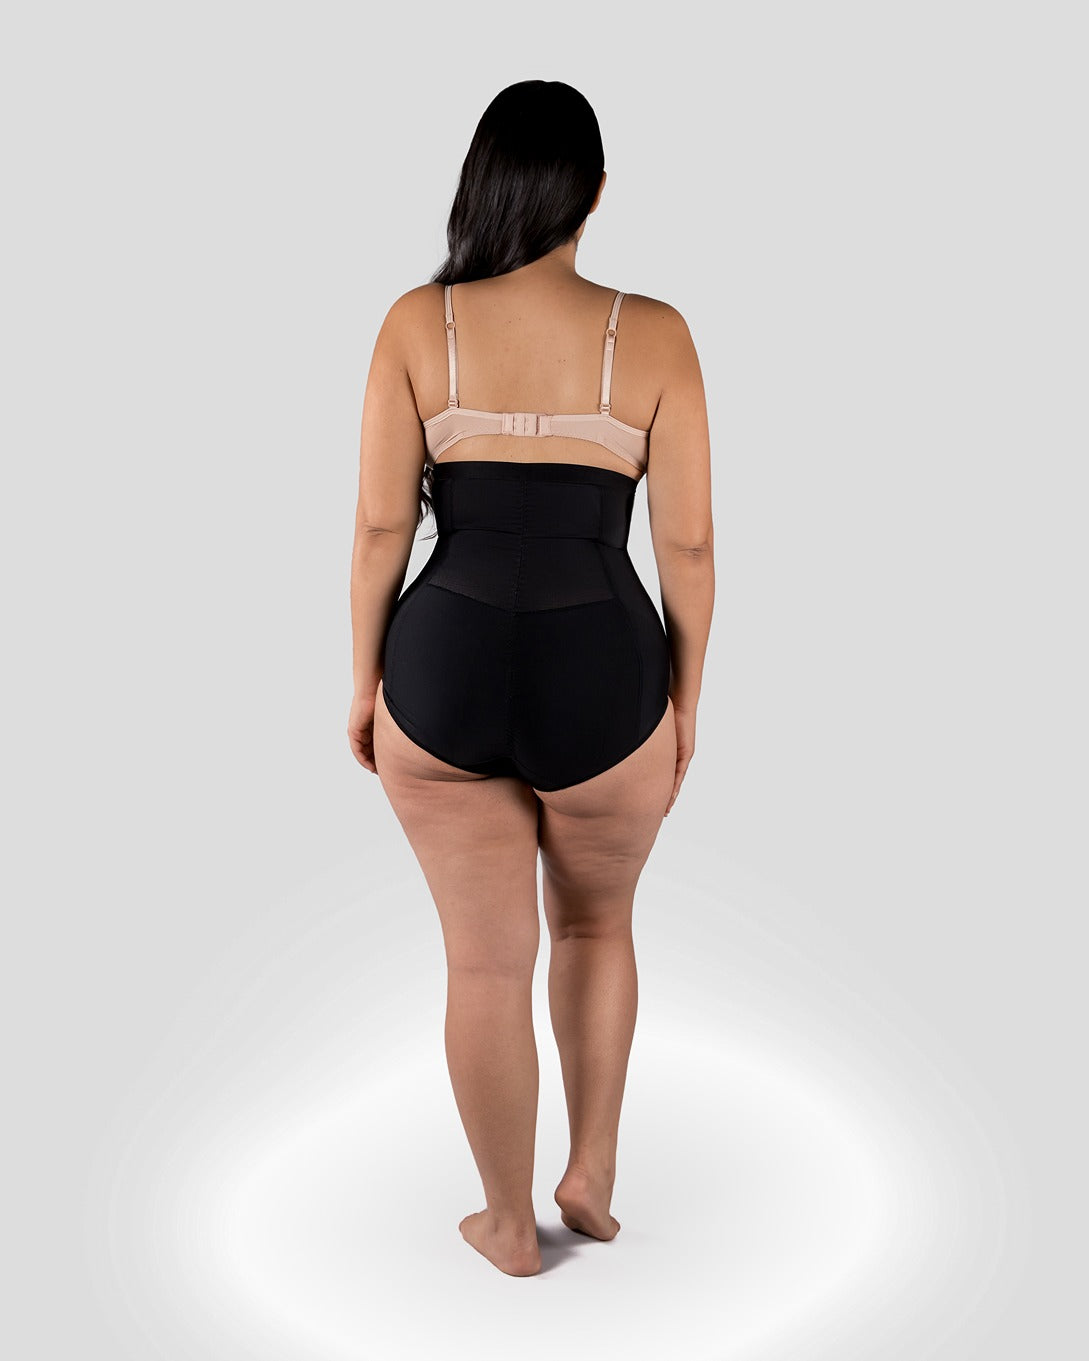 Ariel Girdle Targeted Core Compression Postpartum Recovery – Misty